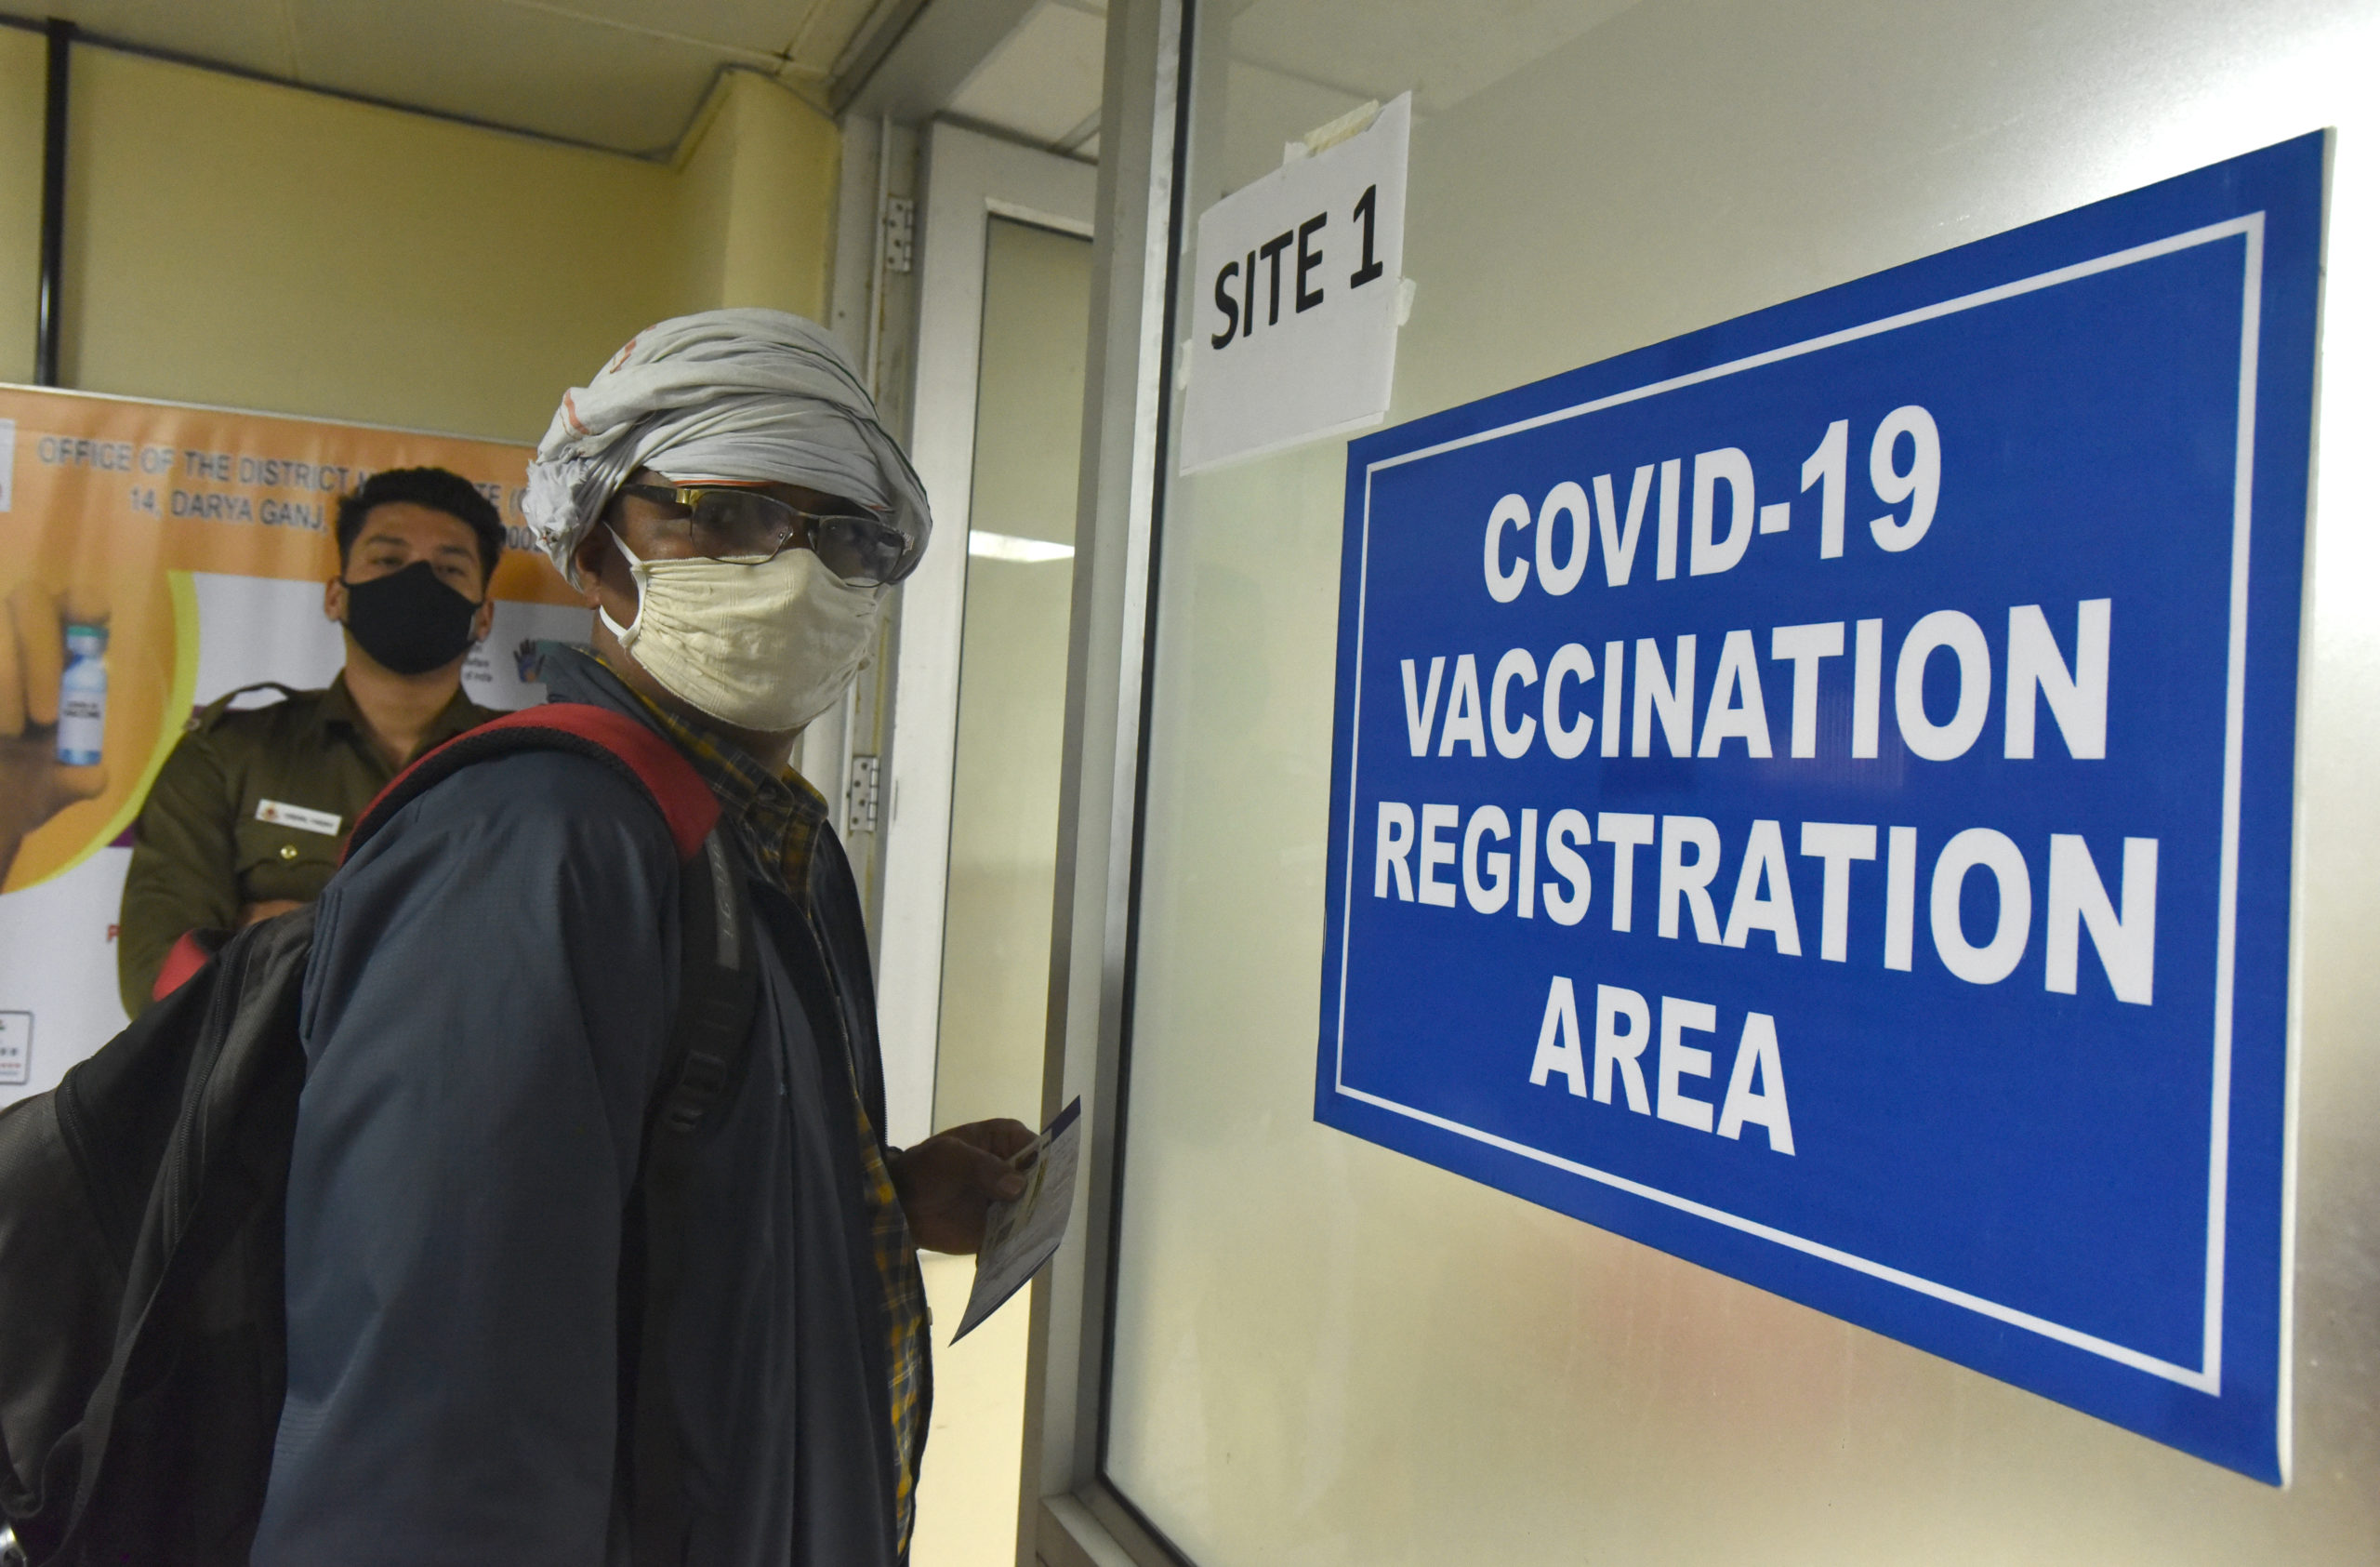 Delhi’s 3rd phase of Covid vaccination begins; aged 45 and above eligible